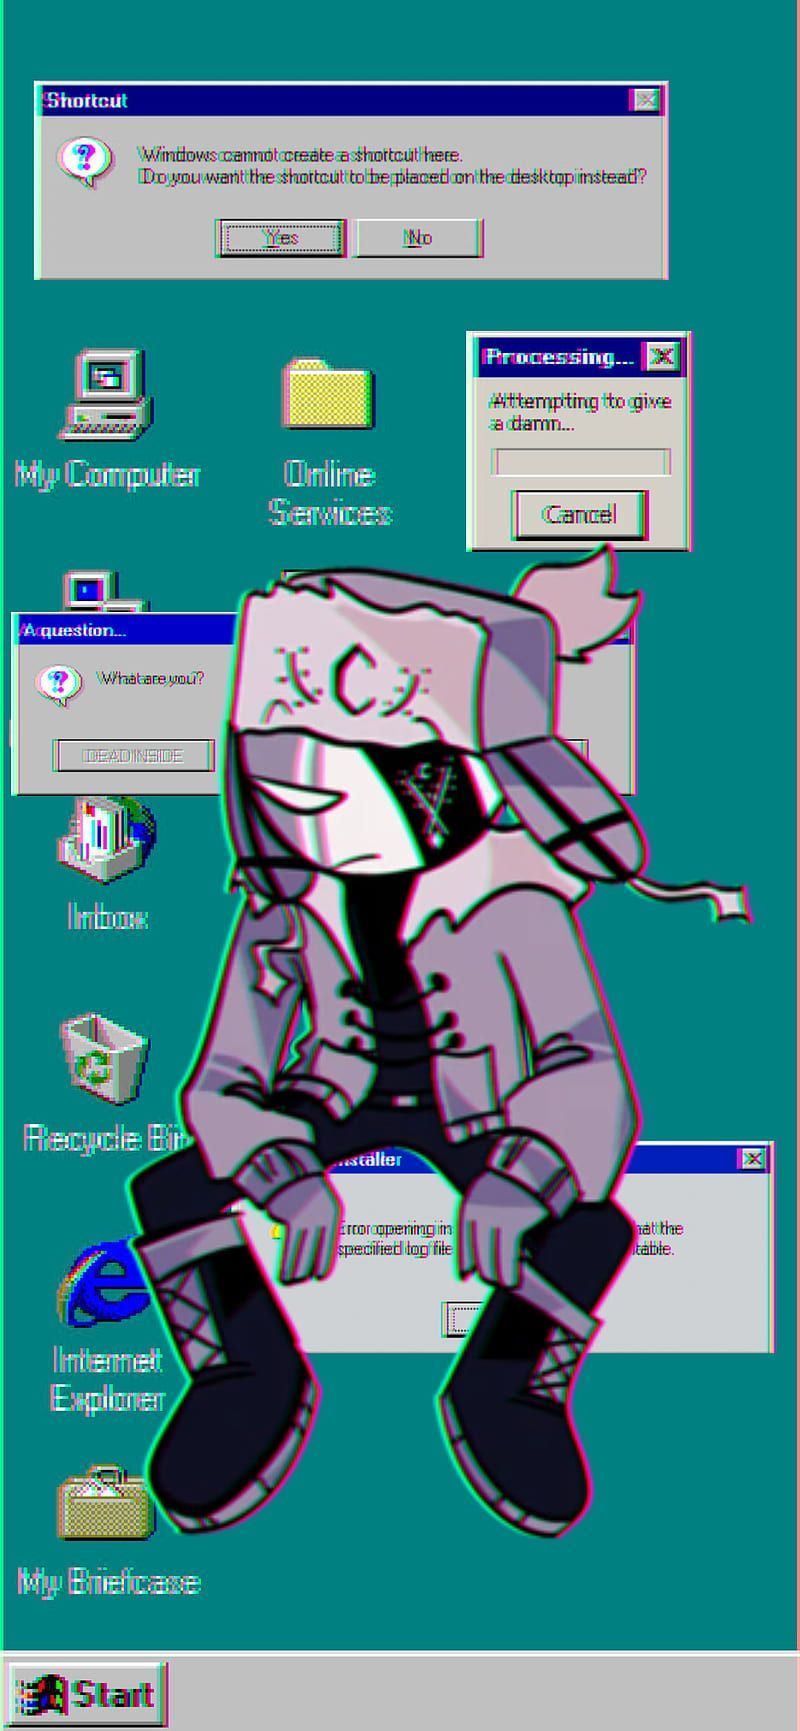 A computer screen with an animated character on it - Windows 95